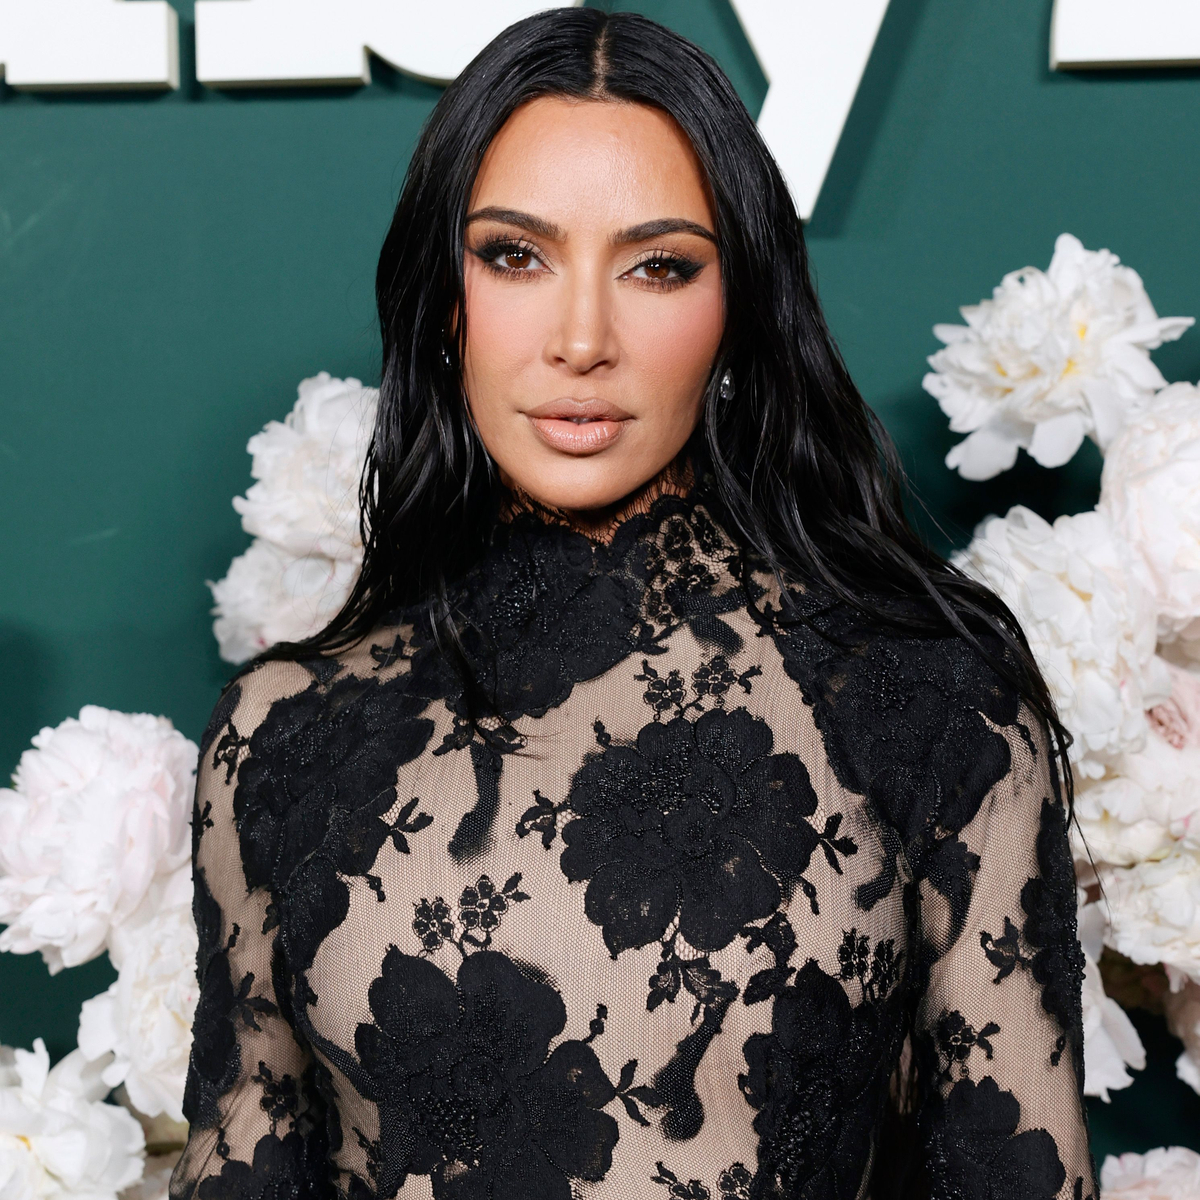 Why Kim Kardashian Was Missing From Family Christmas Video